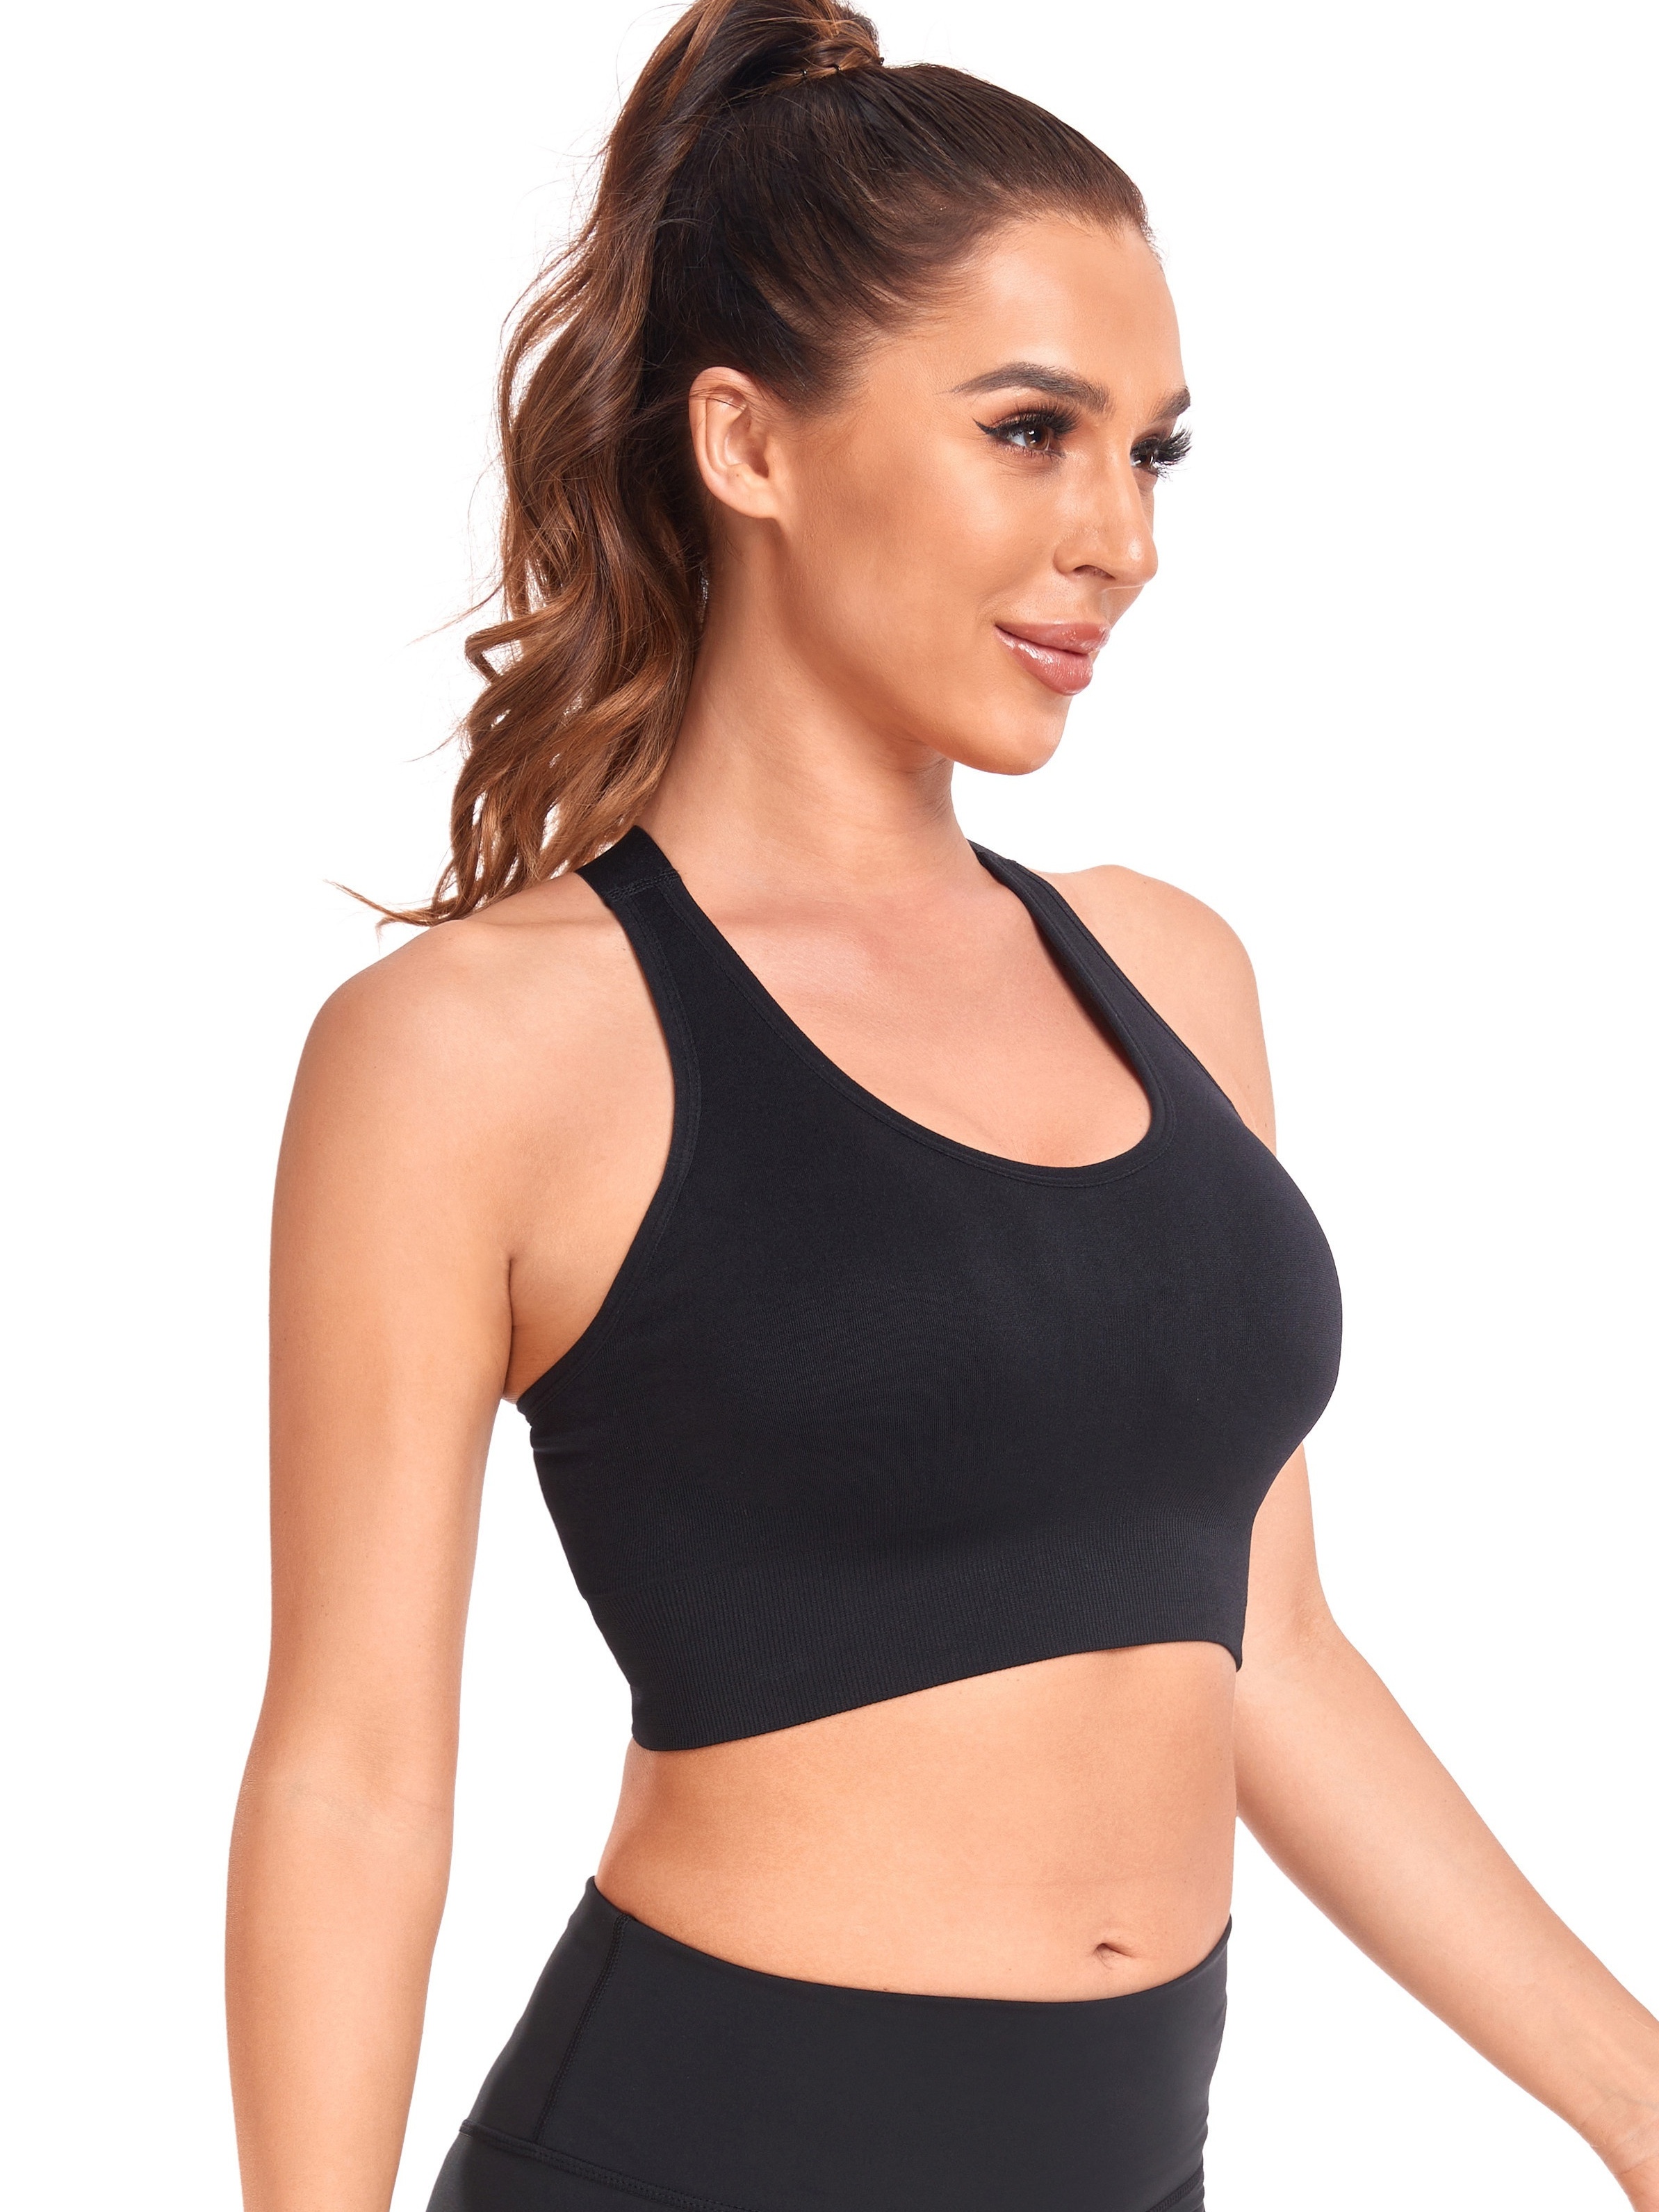 New Strappy Sports Bras Thin Shoulder Straps For Women Cross Back